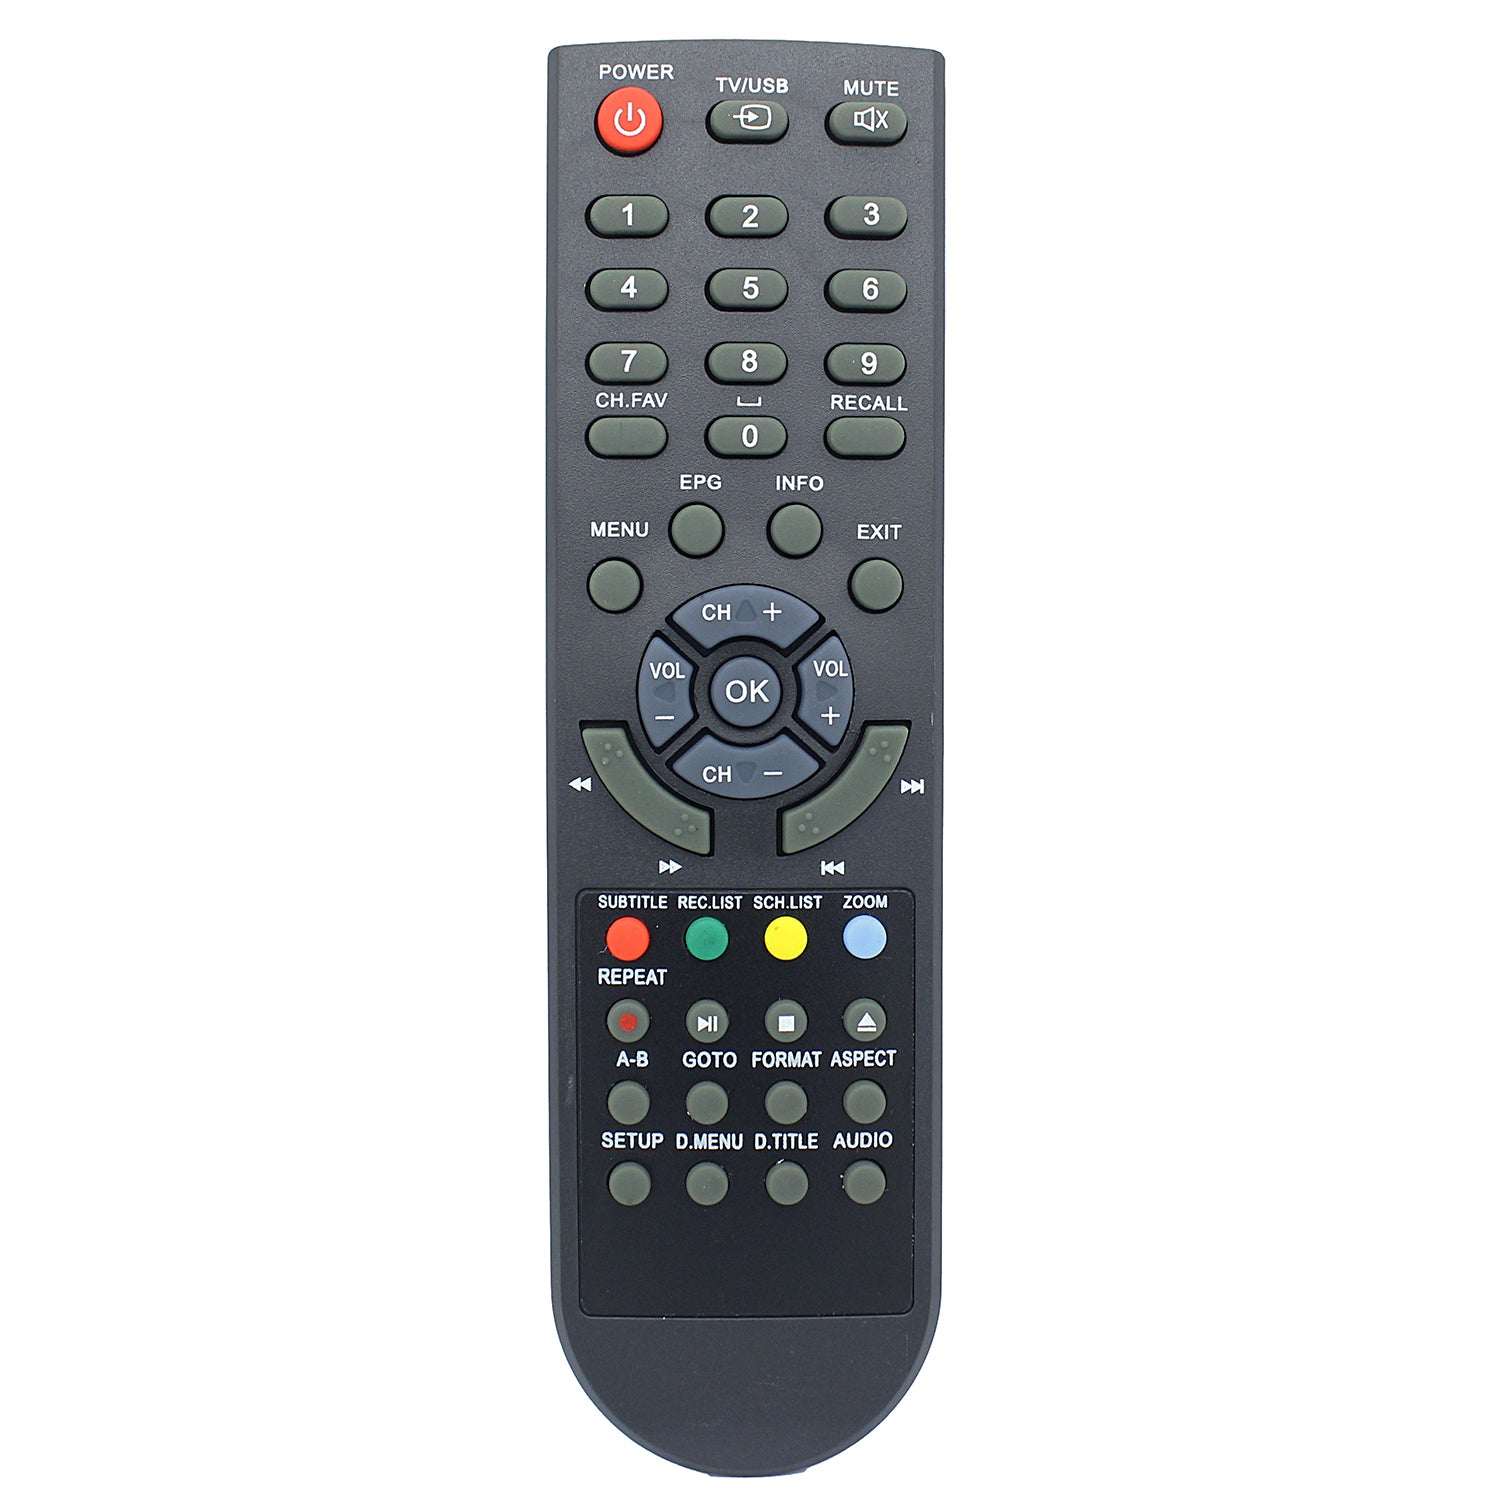 HDB850 Remote Replacement for TEAC Set Top Box Model